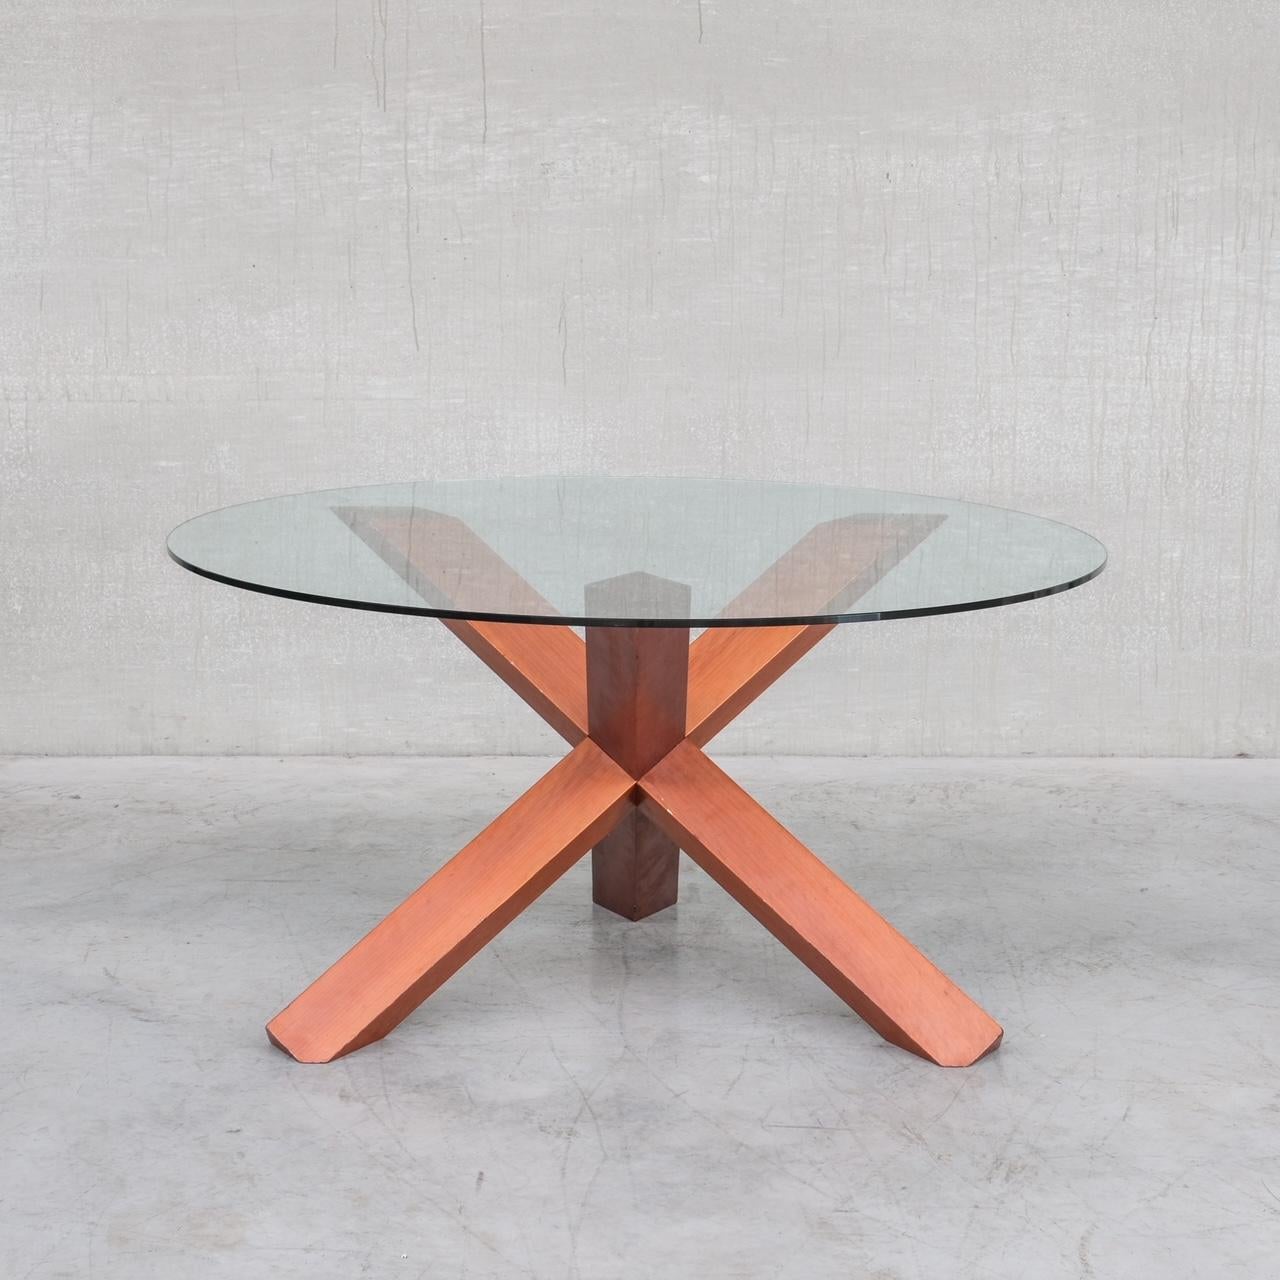 A dining table by Mario Bellini for Cassina. 

Italy, c1977. 

Amazing from every angle, architectural table. 

The glass is damaged so we will be providing new glass, so it can be made larger upon request. 

Some wear commensurate with age,